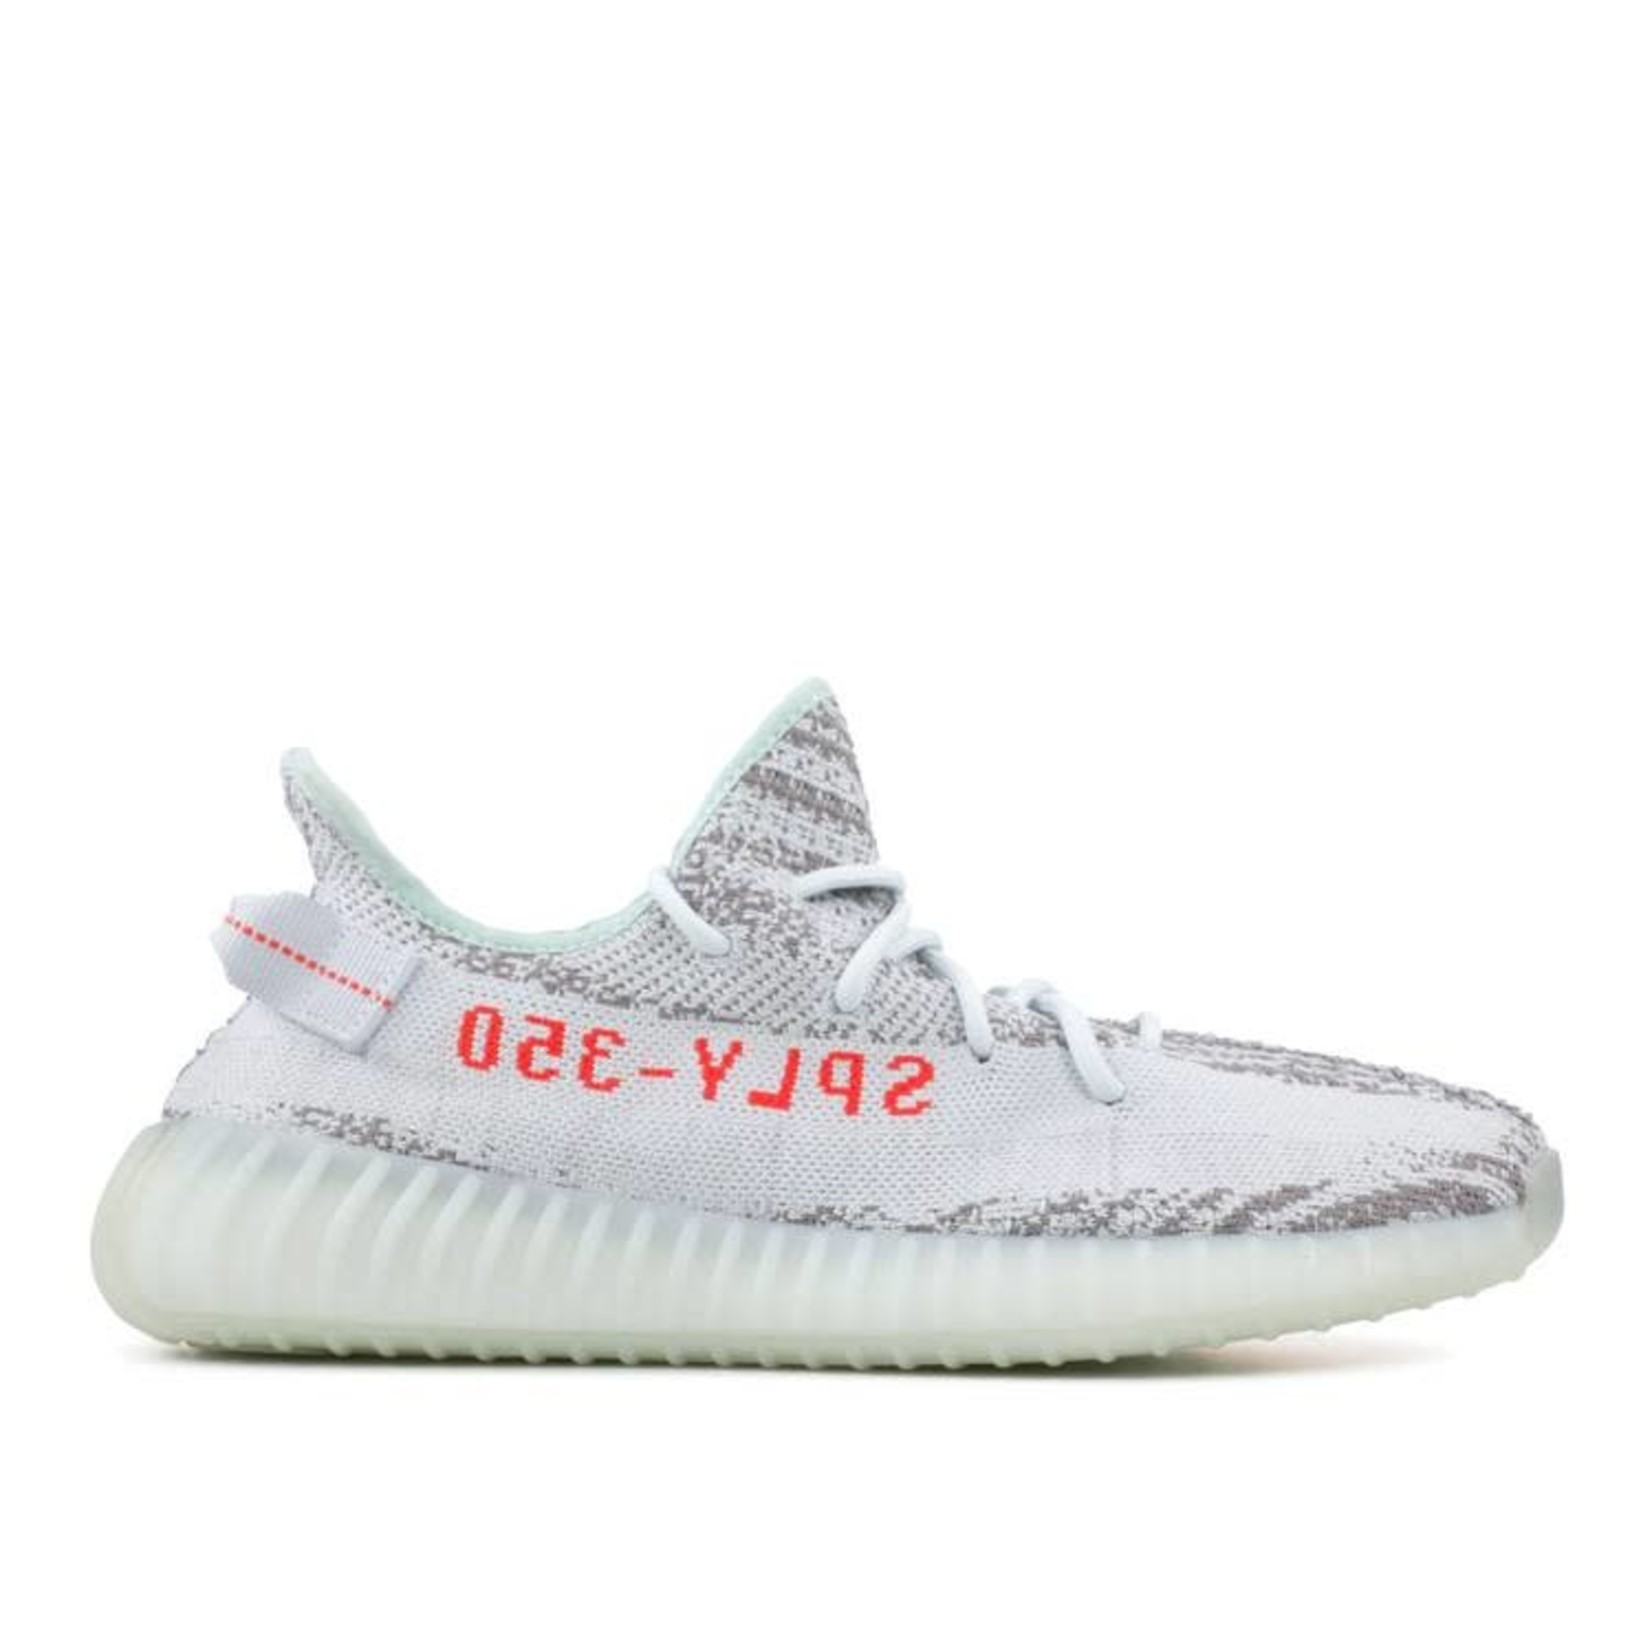 Adidas Adidas Yeezy Boost 350 V2 Blue Tint Size 9, DS BRAND NEW